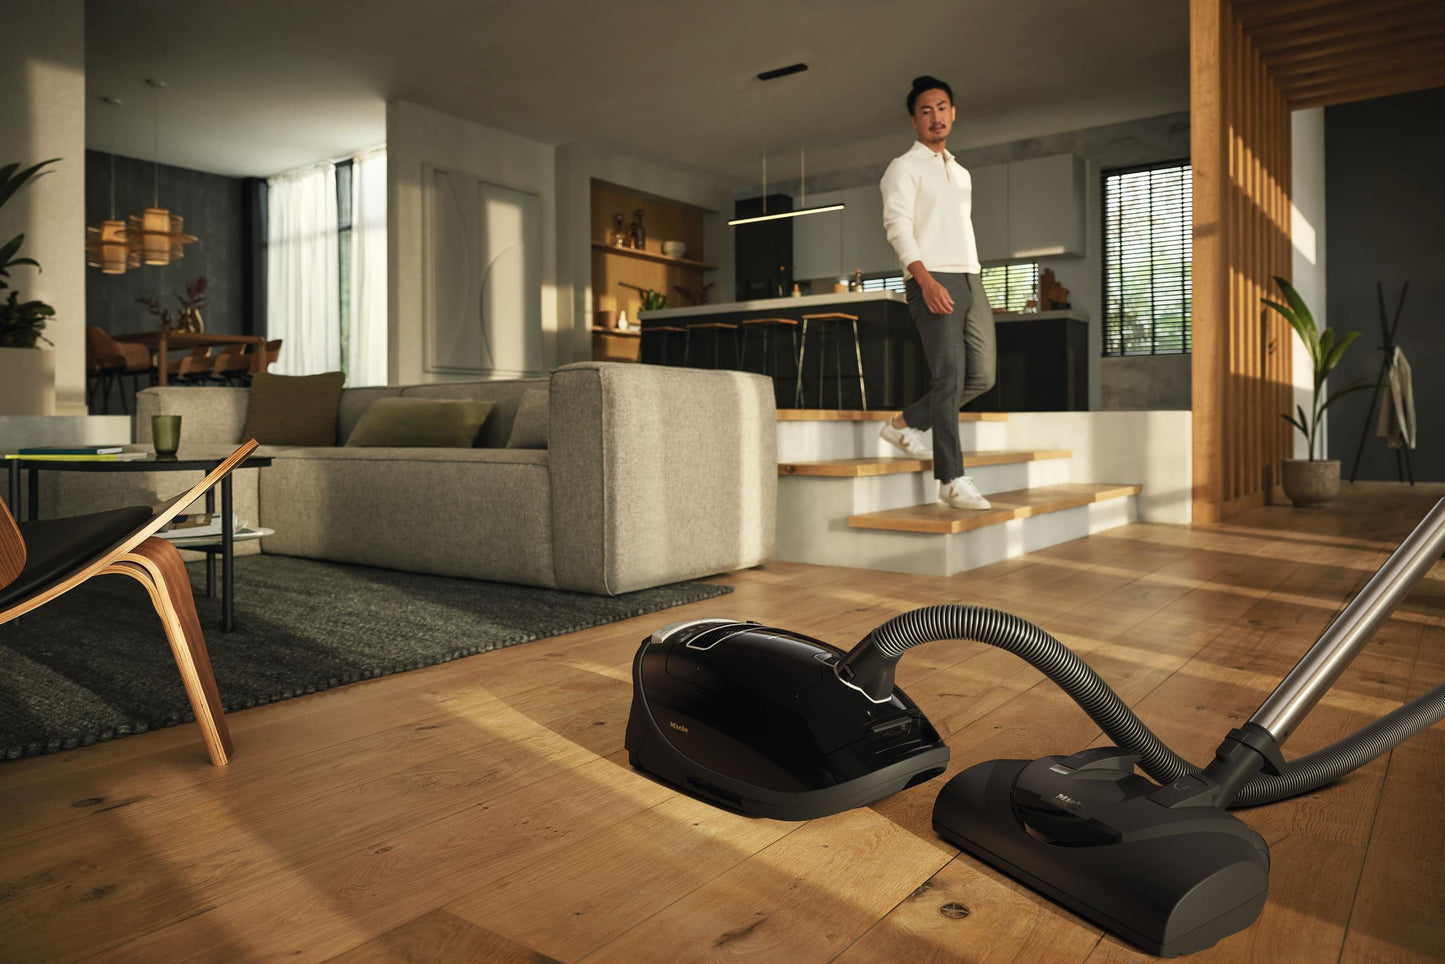 Miele COMPLETEC3KONAPOWERLINESGFE0OBSIDIANBLACK Complete C3 Kona Powerline - Sgfe0 - Canister Vacuum Cleaners With Electrobrush For Thorough Cleaning Of Heavy-Duty Carpeting.